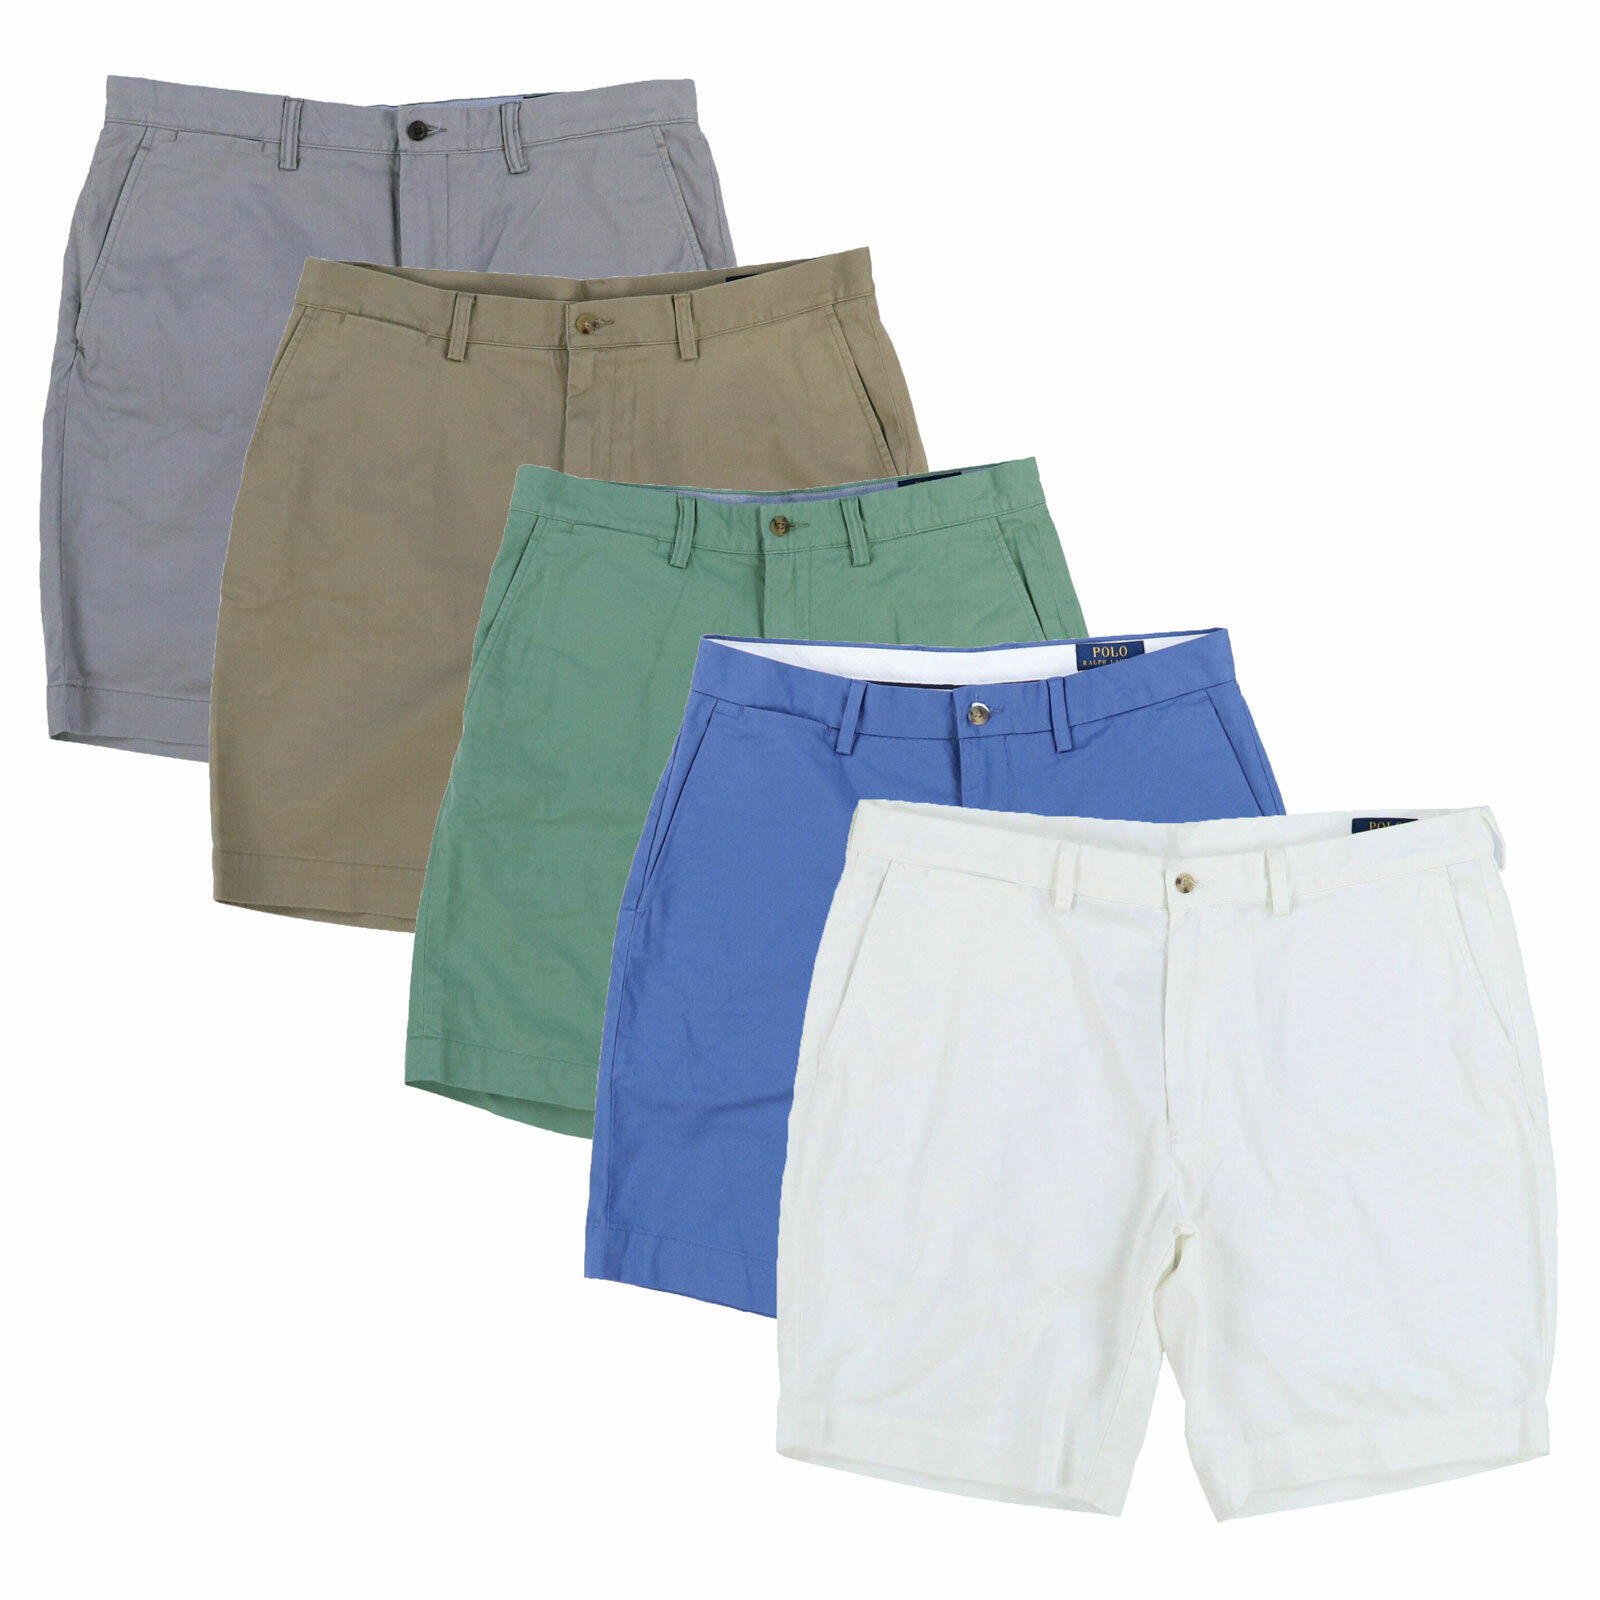 Polo Ralph Lauren Mens Shorts 9 Inch Classic Fit New 29 30 31 32 